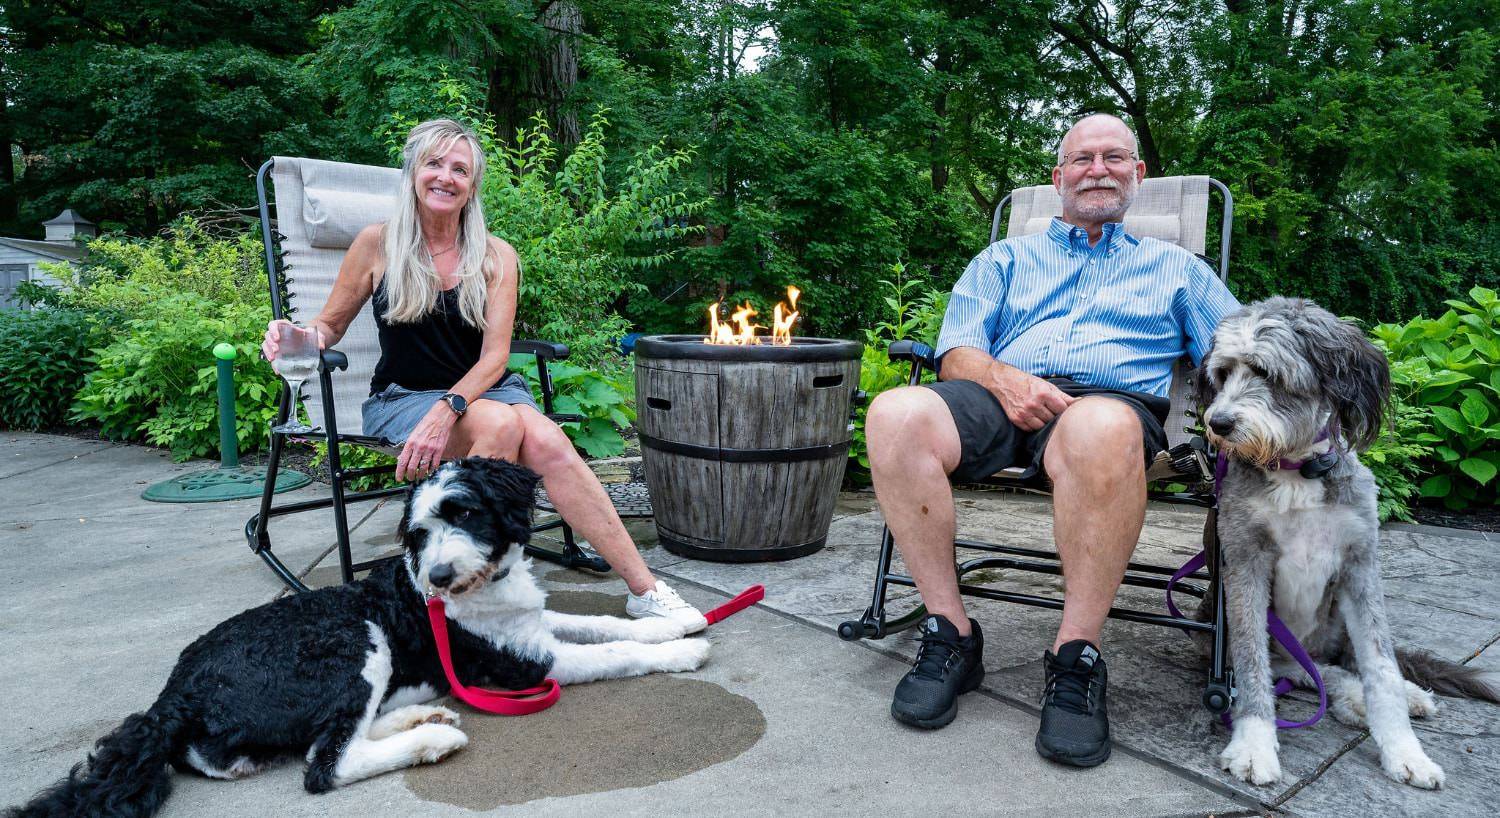 Man and woman sitting in chairs on concrete patio next to a fire pit with a large black and white dog and a large gray and white dog with greenery in the background